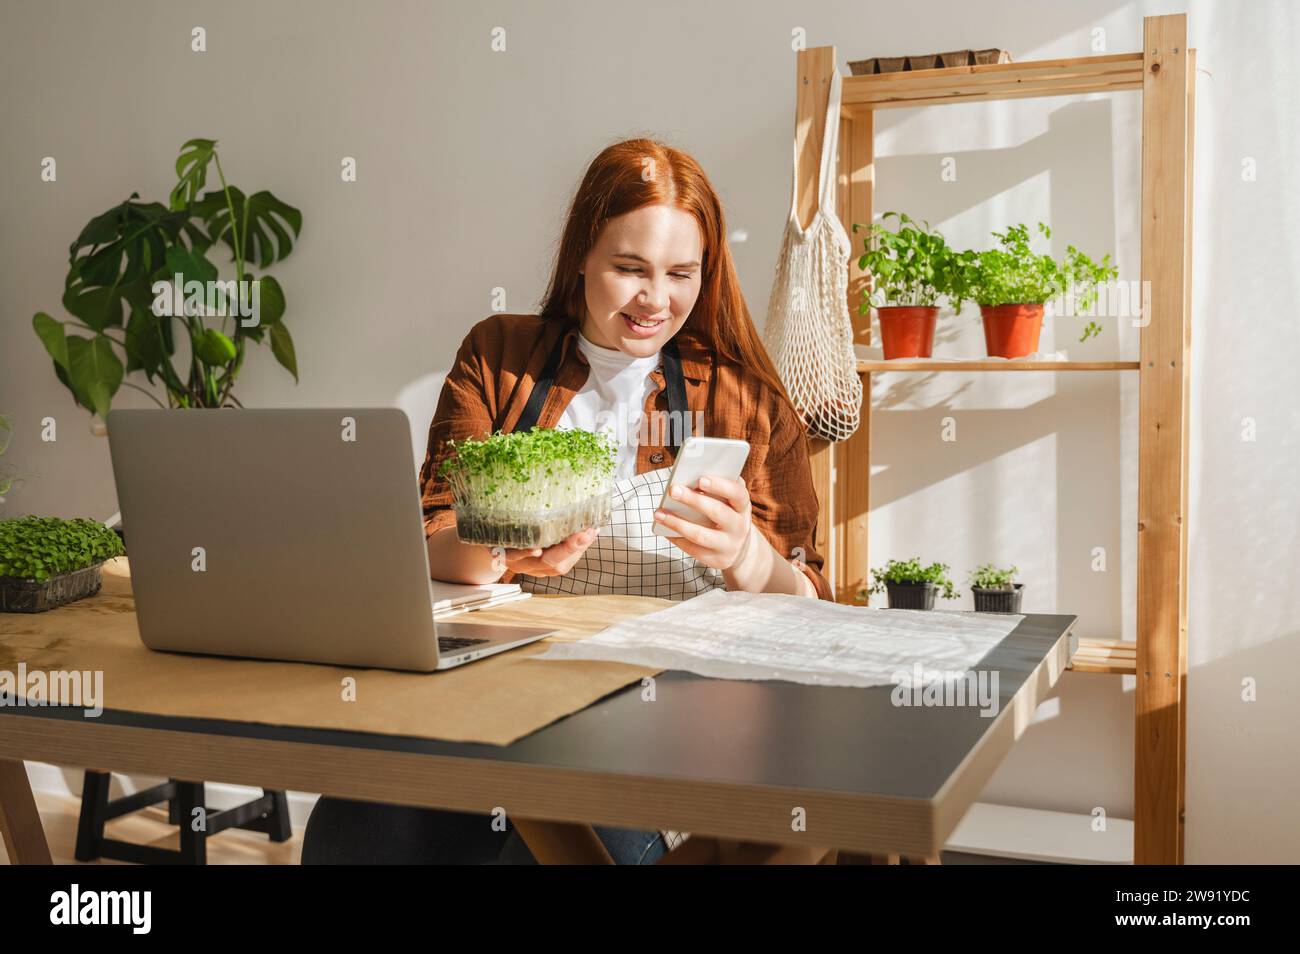 Smiling botanist using smart phone with laptop on desk at home office Stock Photo